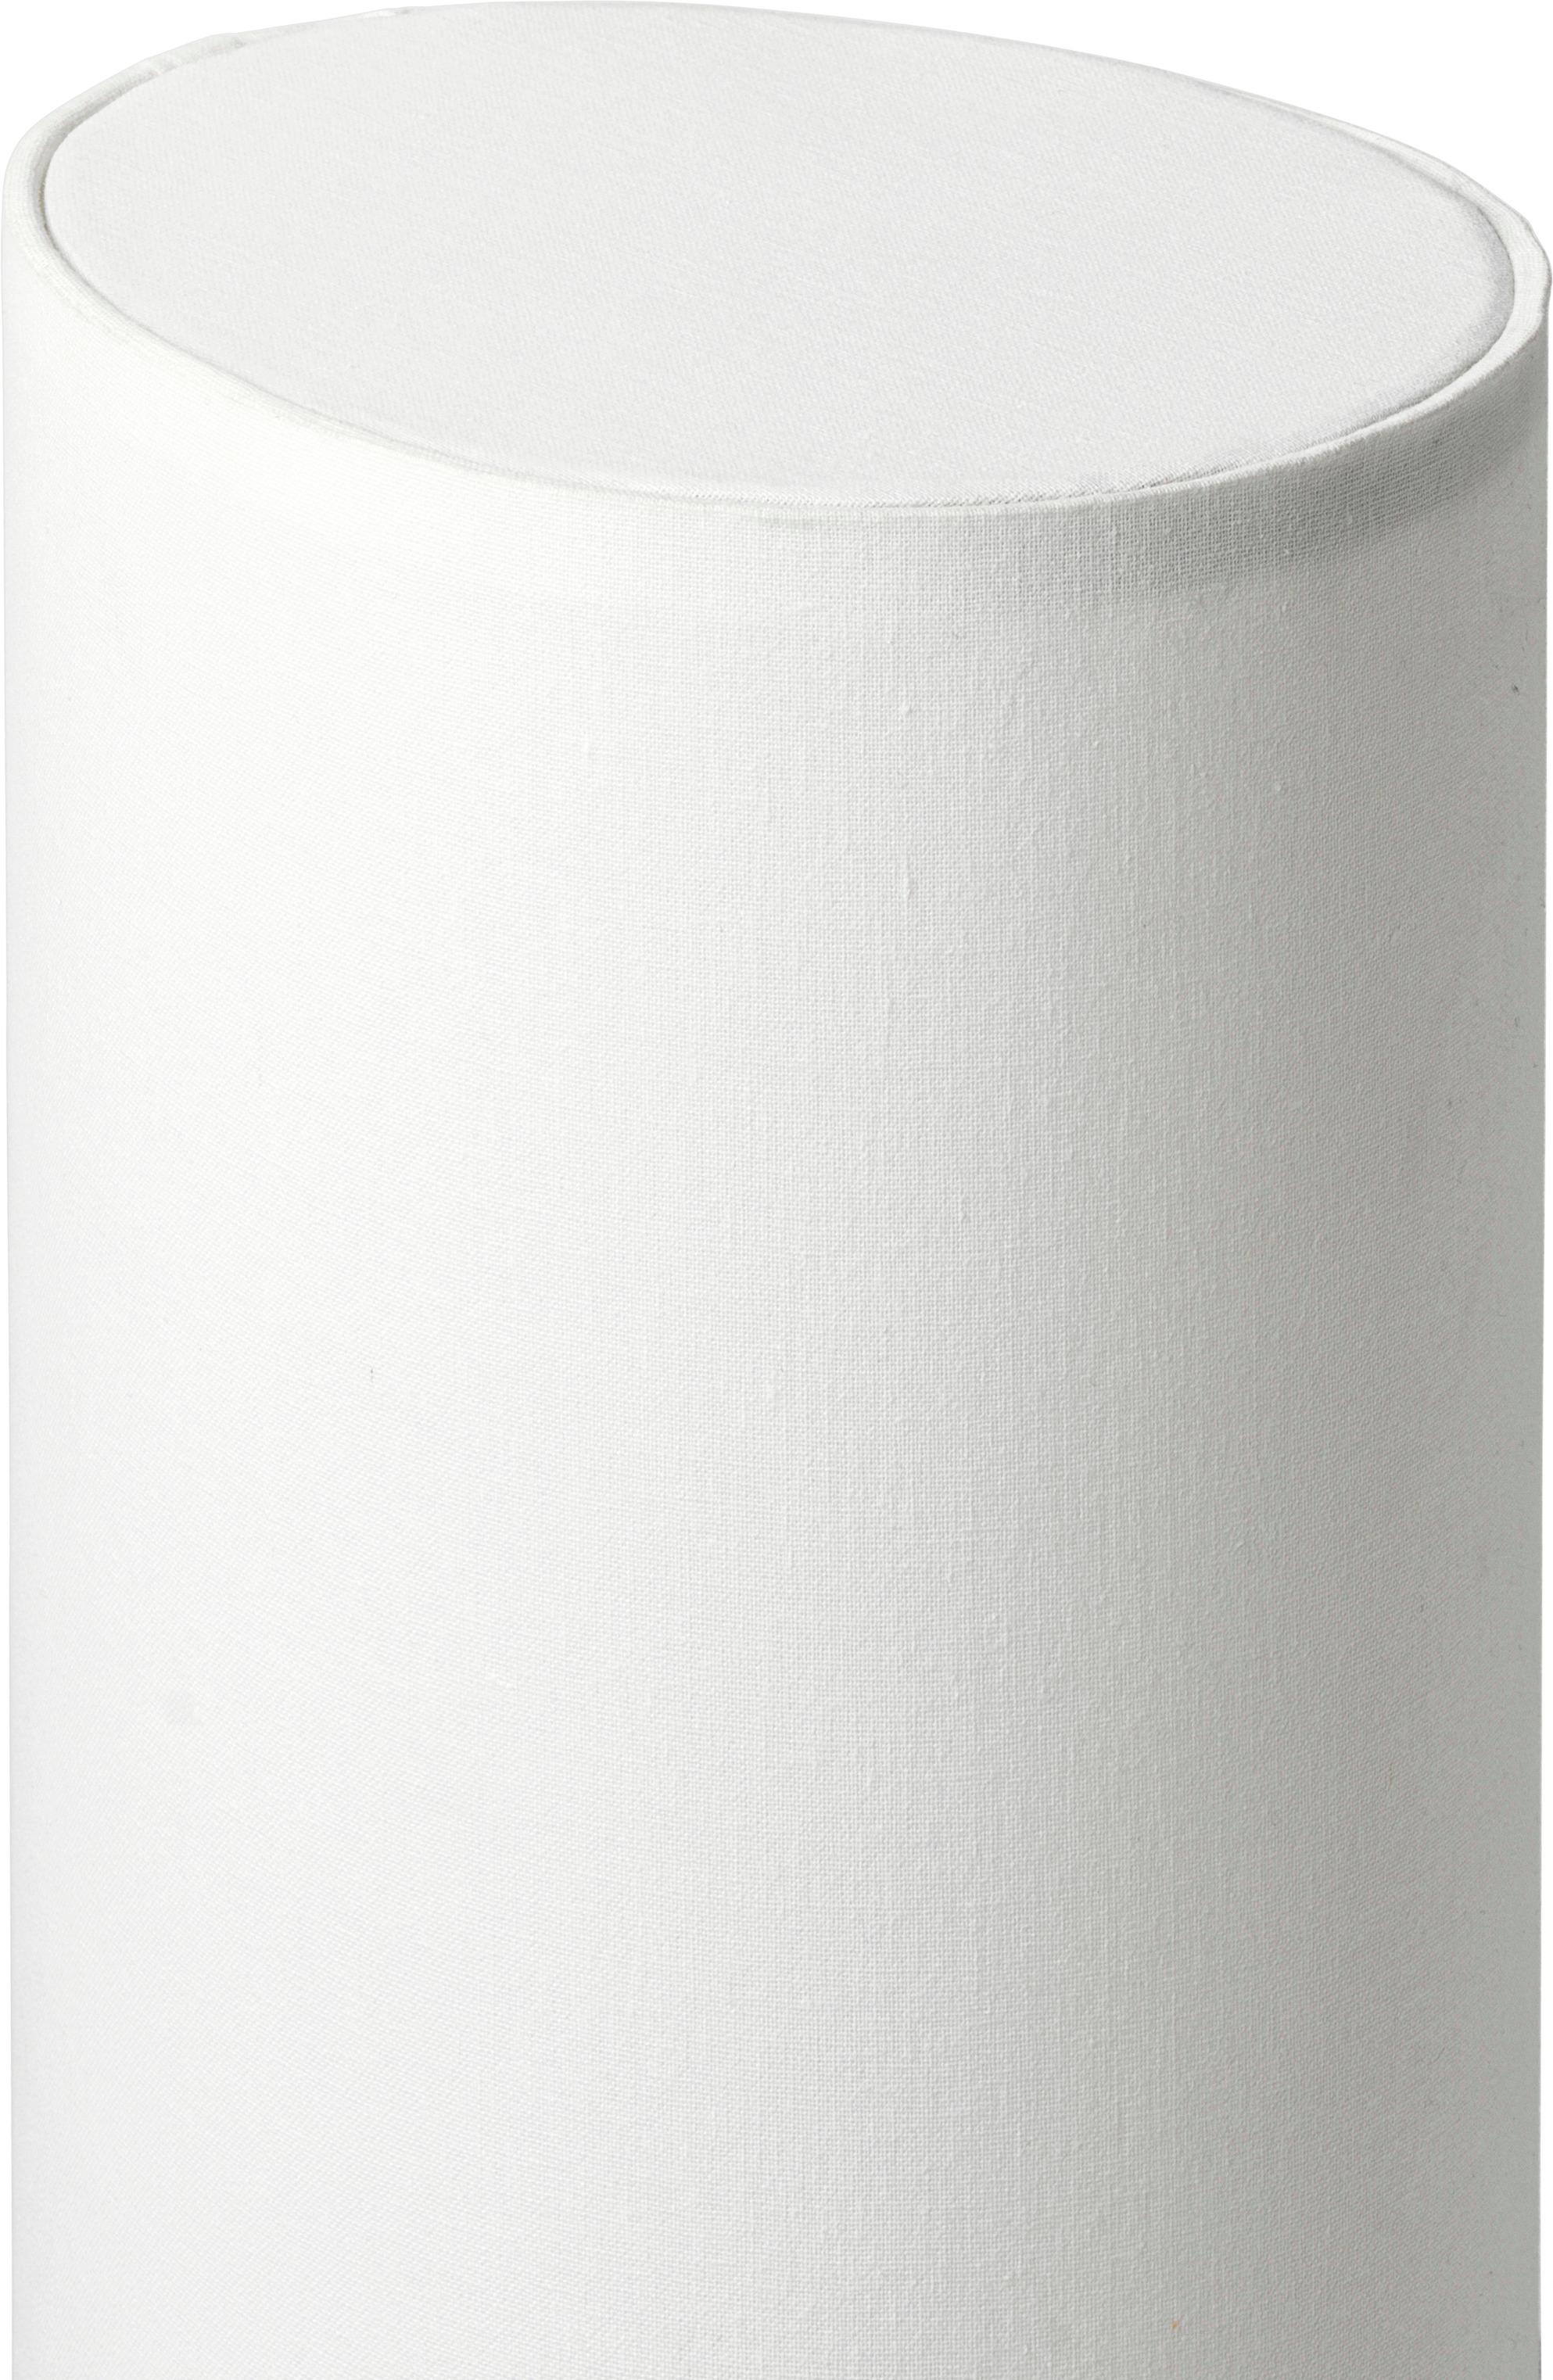 'Unbound' Table Lamp by Space Copenhagen for GUBI with White Linen Shade For Sale 3